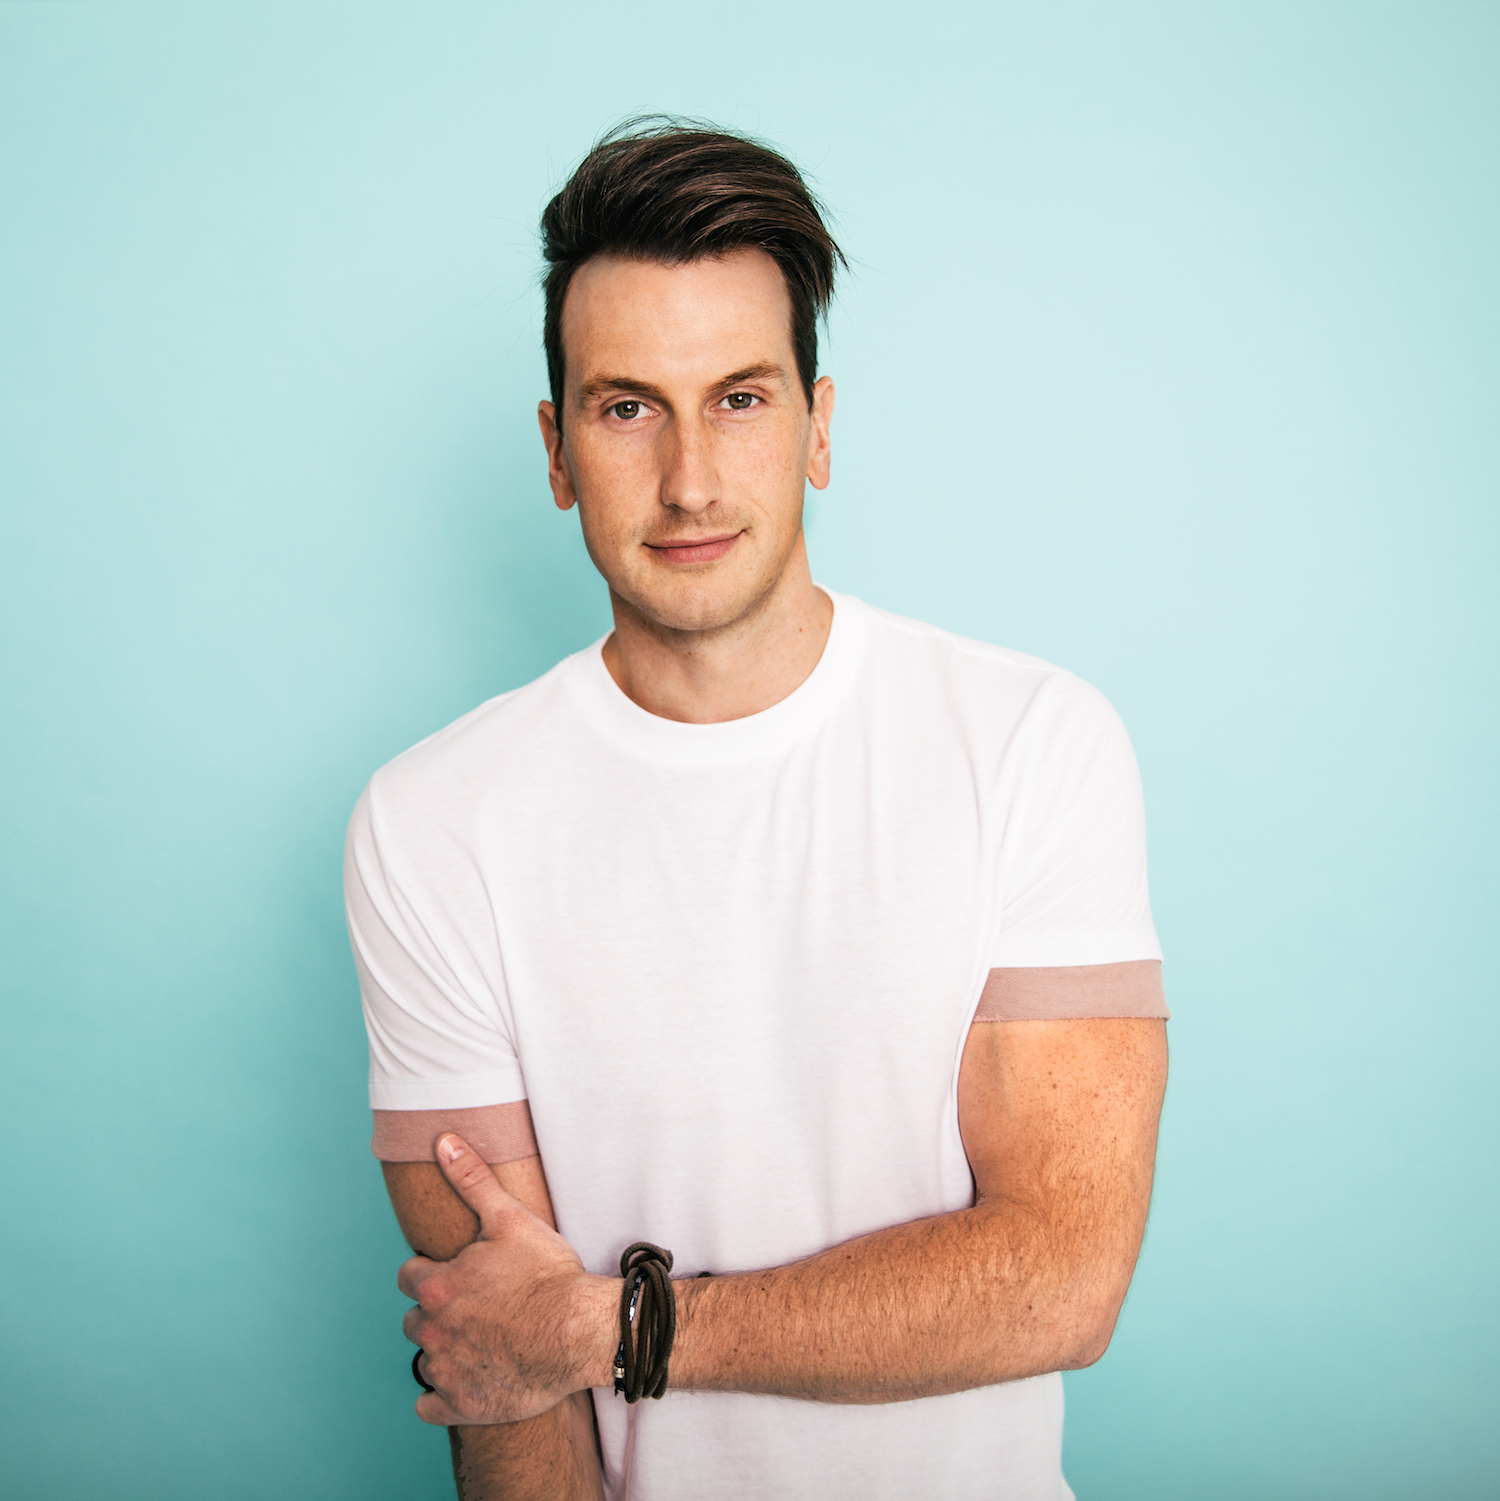 Russell Dickerson Unveils Music Video for “Blue Tacoma” – Watch Now